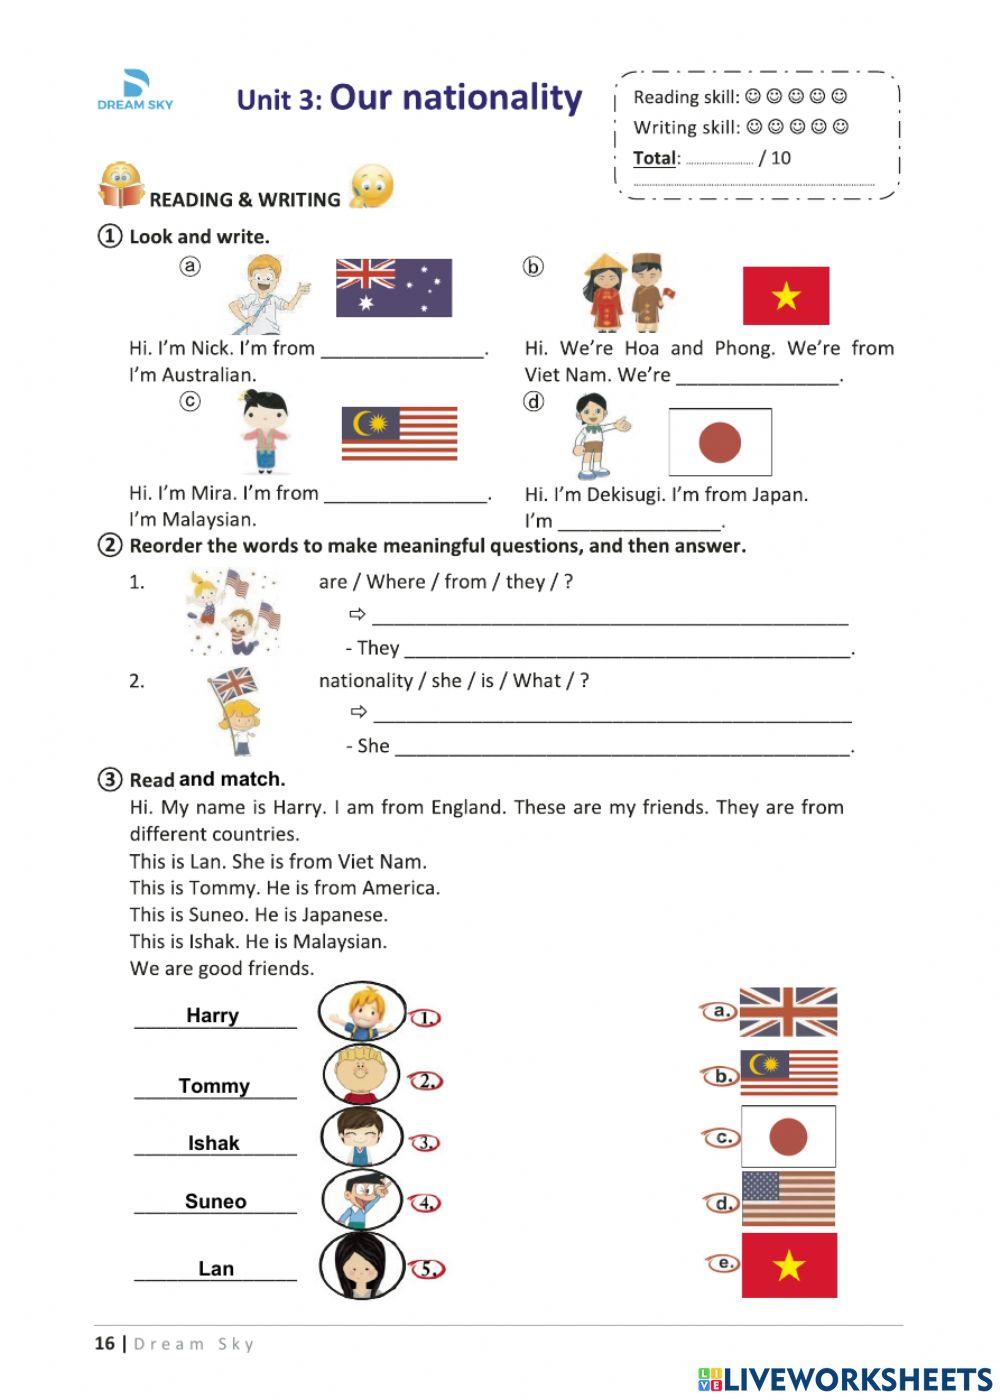 Grade 4 - Unit 3: Our nationality